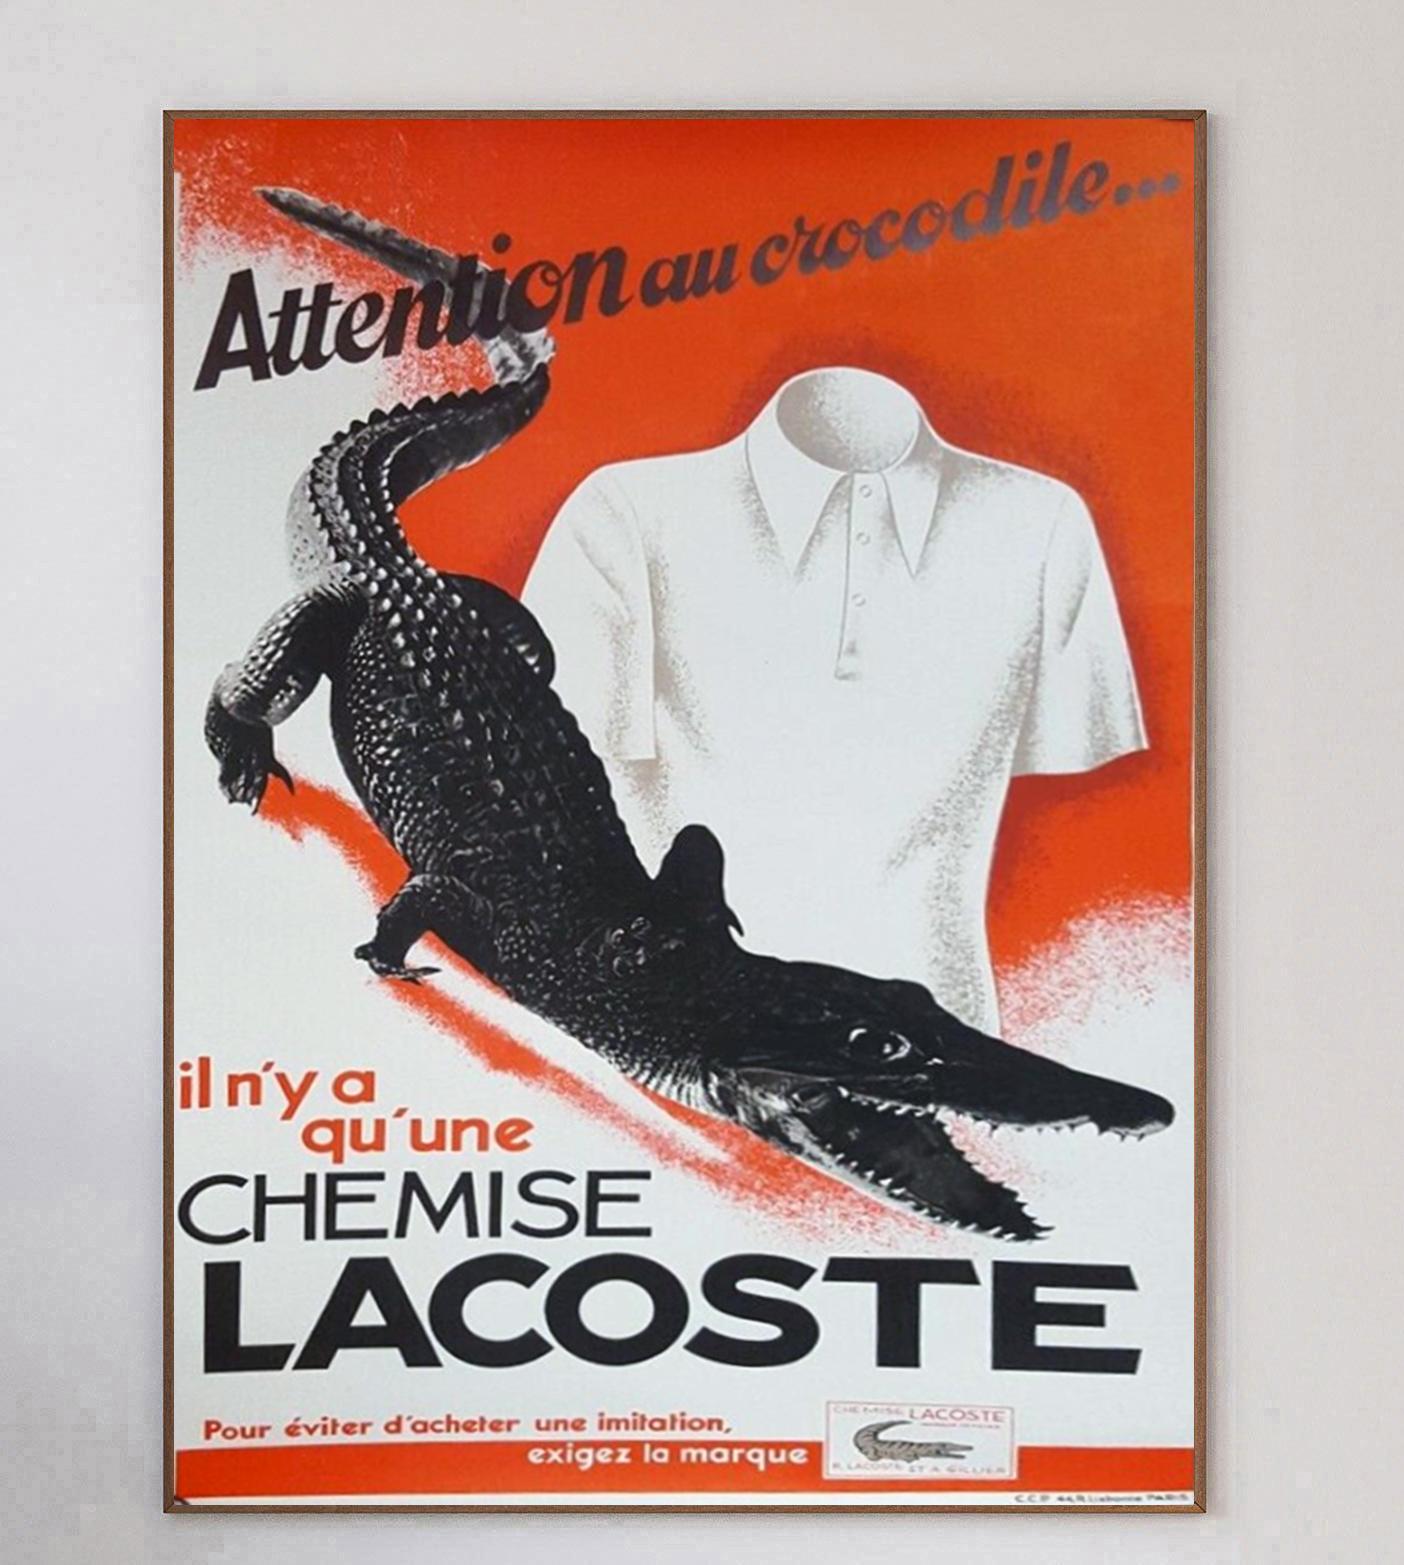 Fantastic poster promoting French fashion brand Lacoste and their polo shirts. The famous brand founded in 1933 by the great tennis player Rene Lacoste continues today with great success.

Reading 